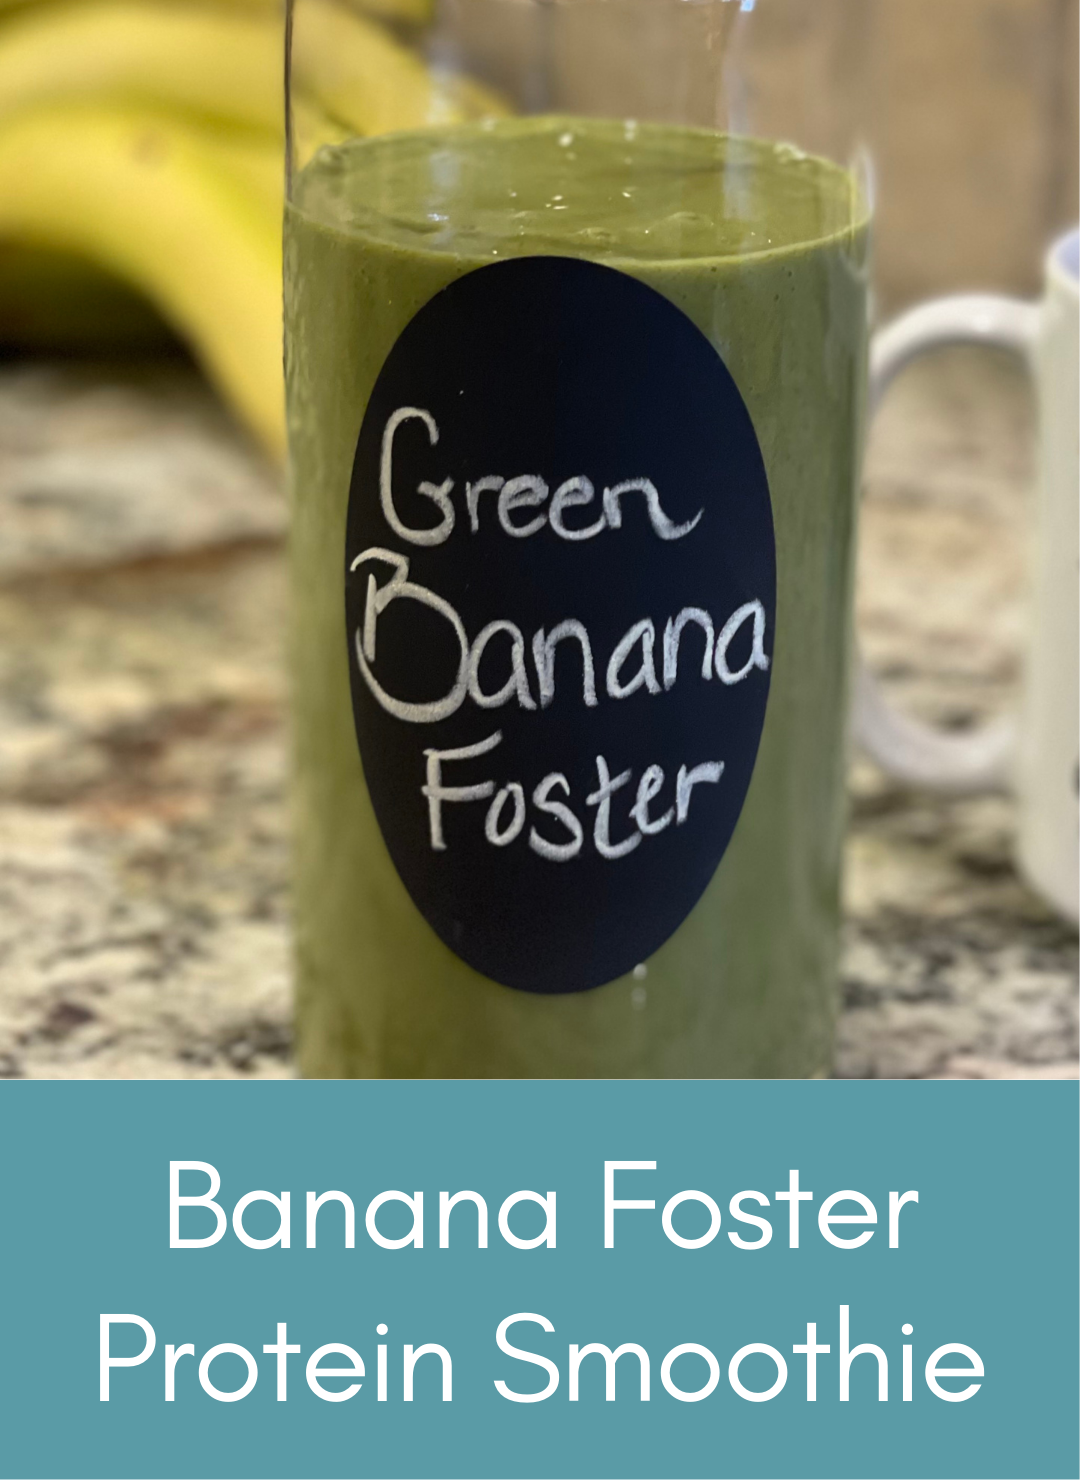 Green banana foster superfood power protein smoothie Picture with link to recipe